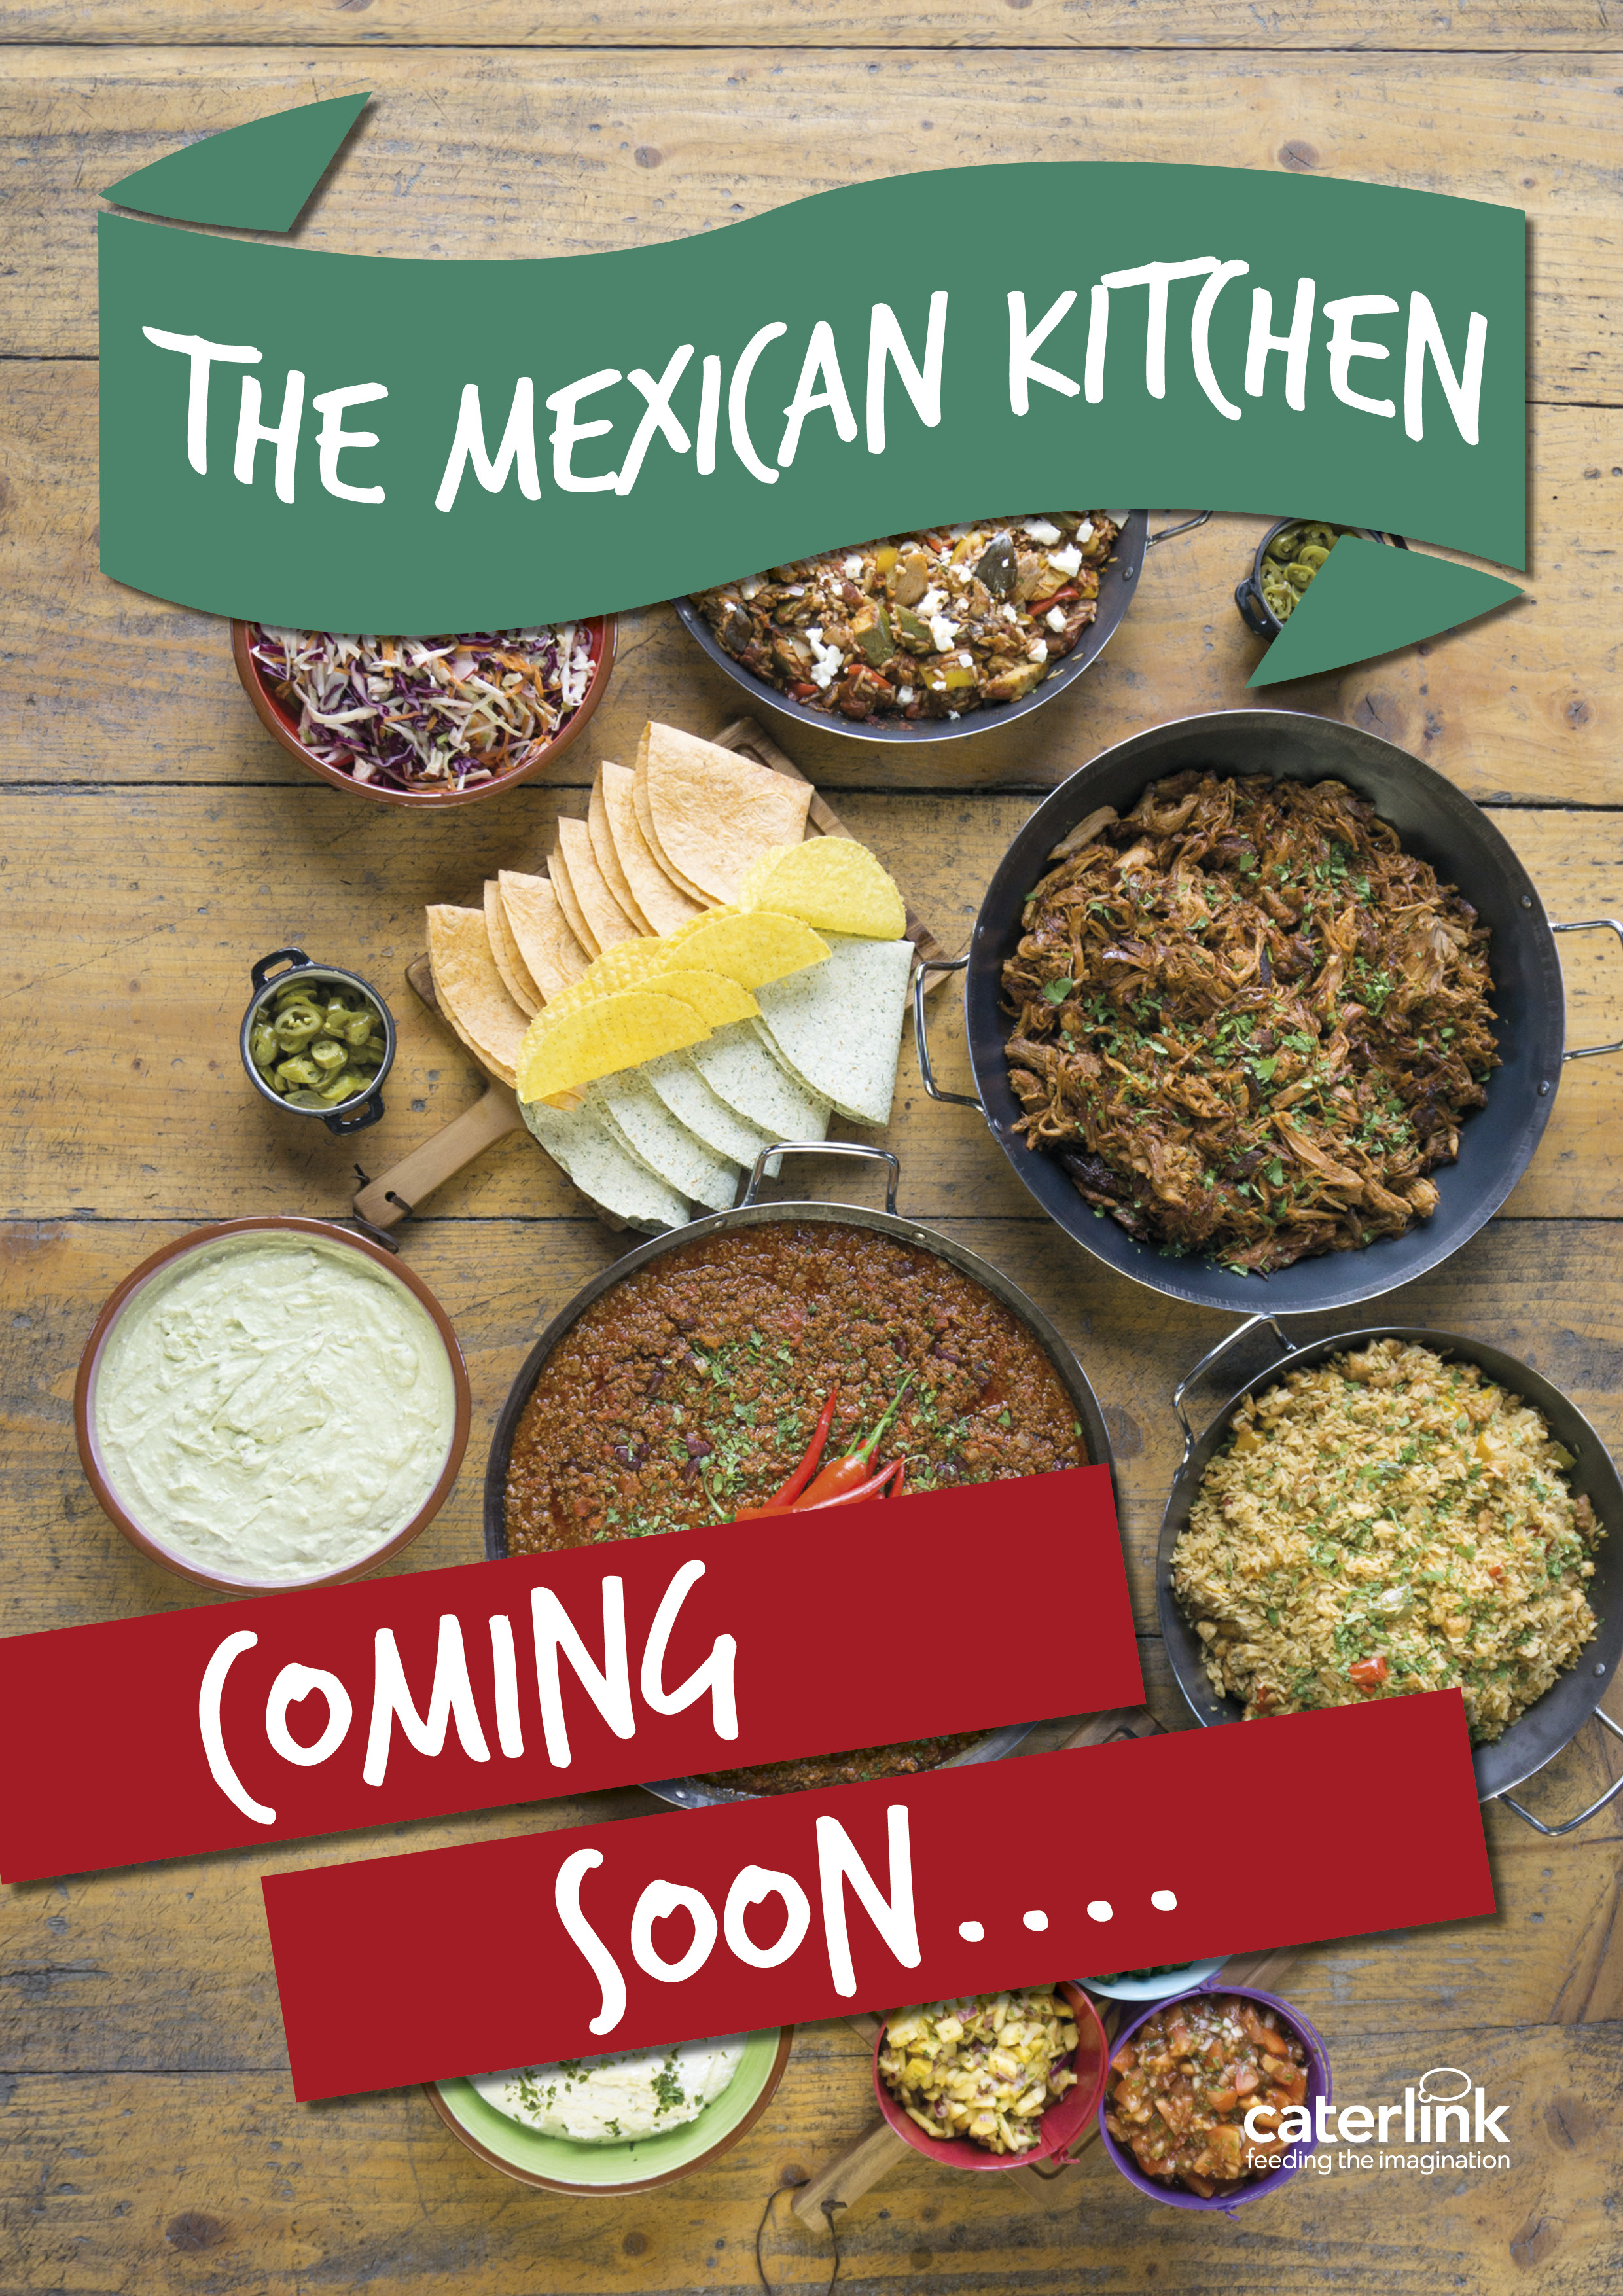 Attachment Coming Soon Mexican Kitchen A4.jpg